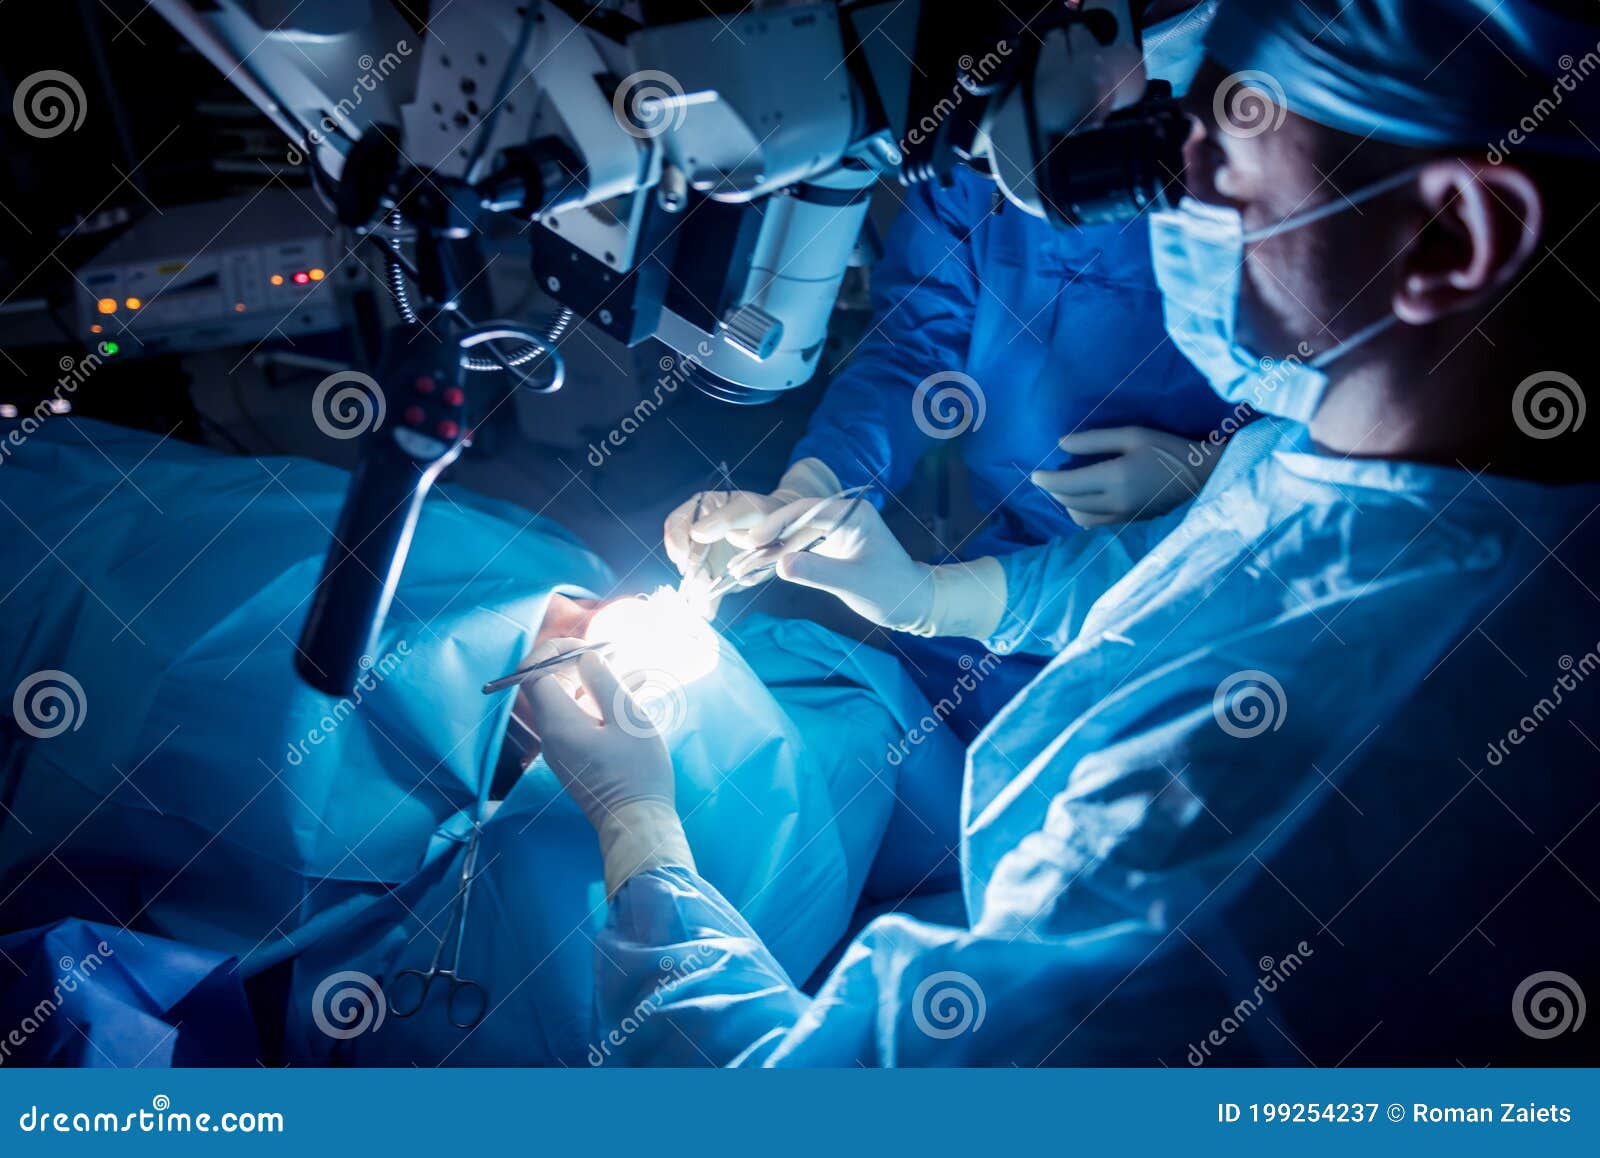 A Team of Surgeons Performing Brain Surgery To Remove a Tumor. Stock Image  - Image of leads, mask: 199254237